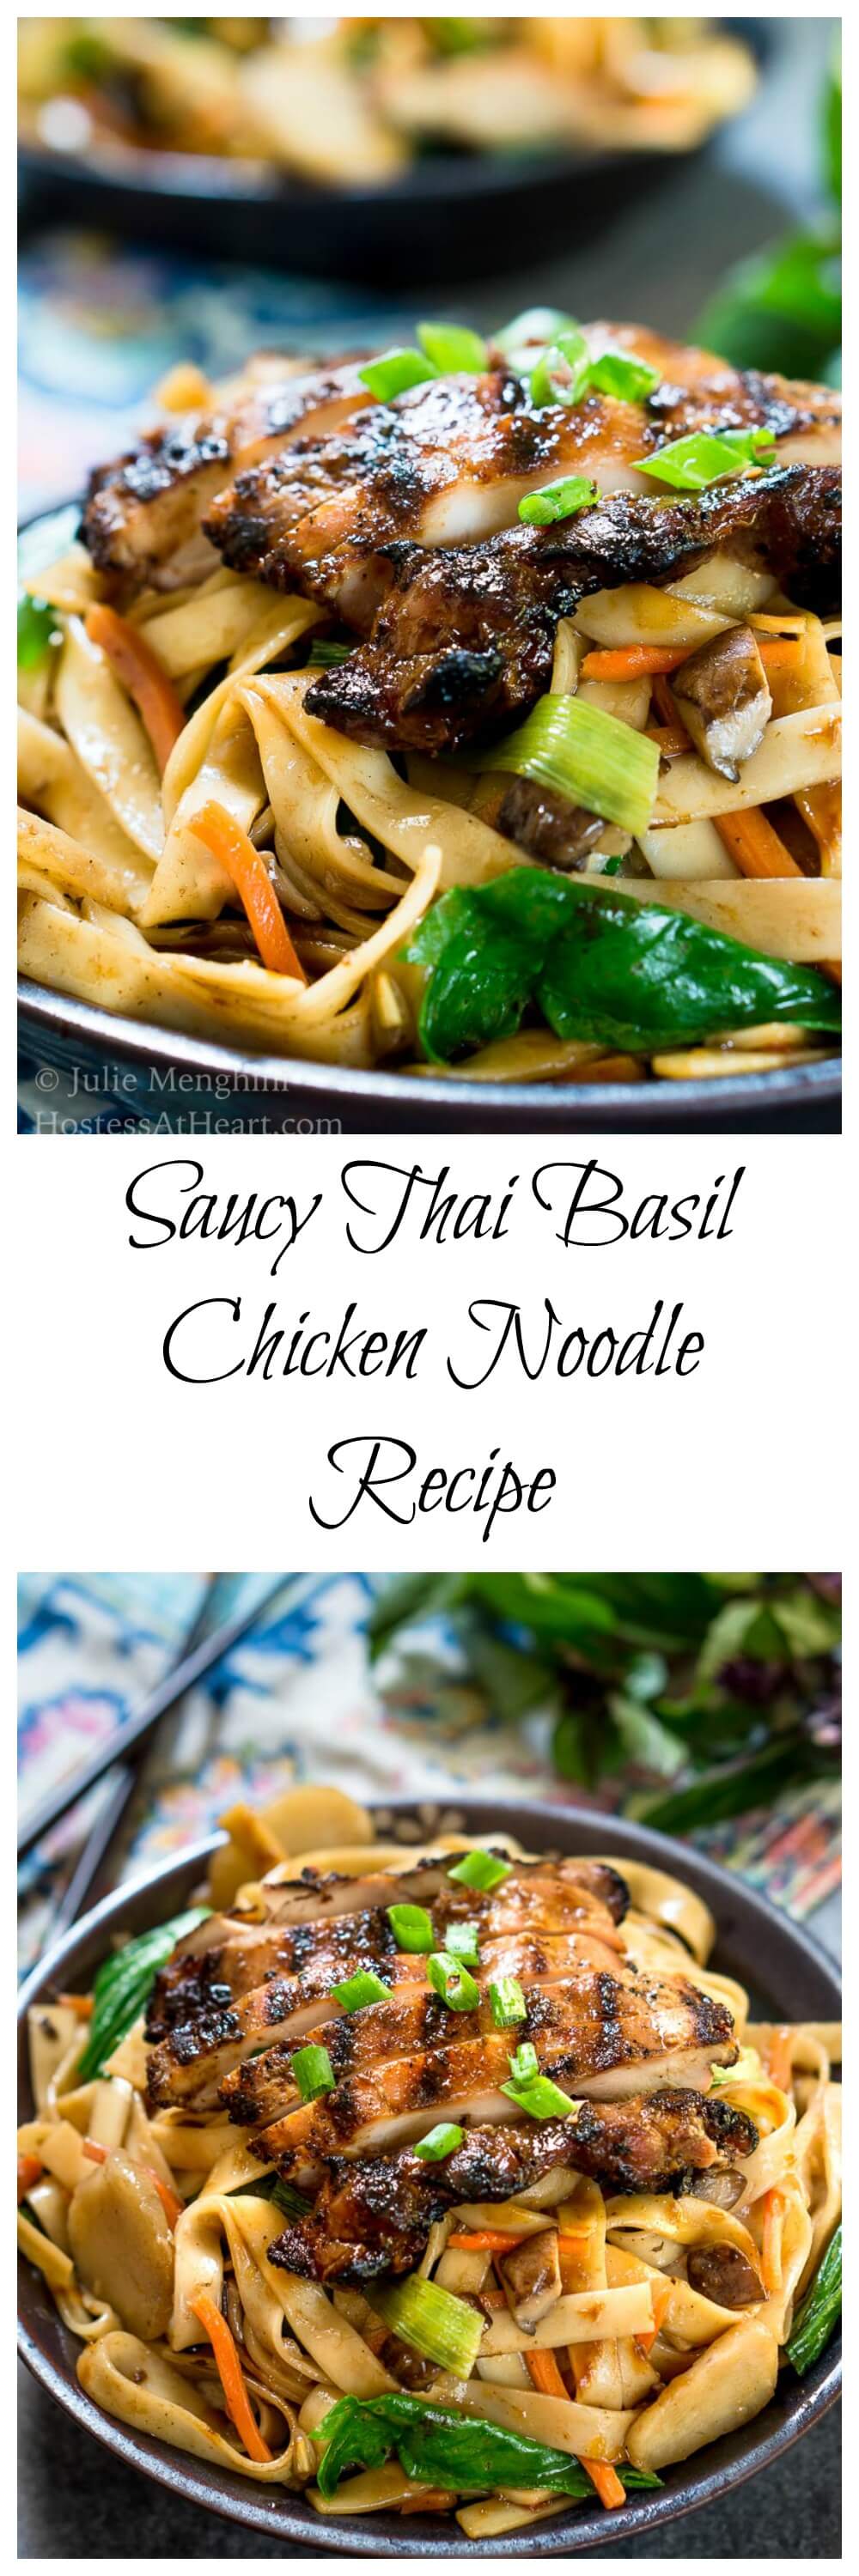 Saucy Thai Basil Chicken Noodle Bowl Recipe is a creamy blend of Asian flavors.  It's a little bit sweet and spicy and a whole bunch delicious! | HostessAtHeart.com